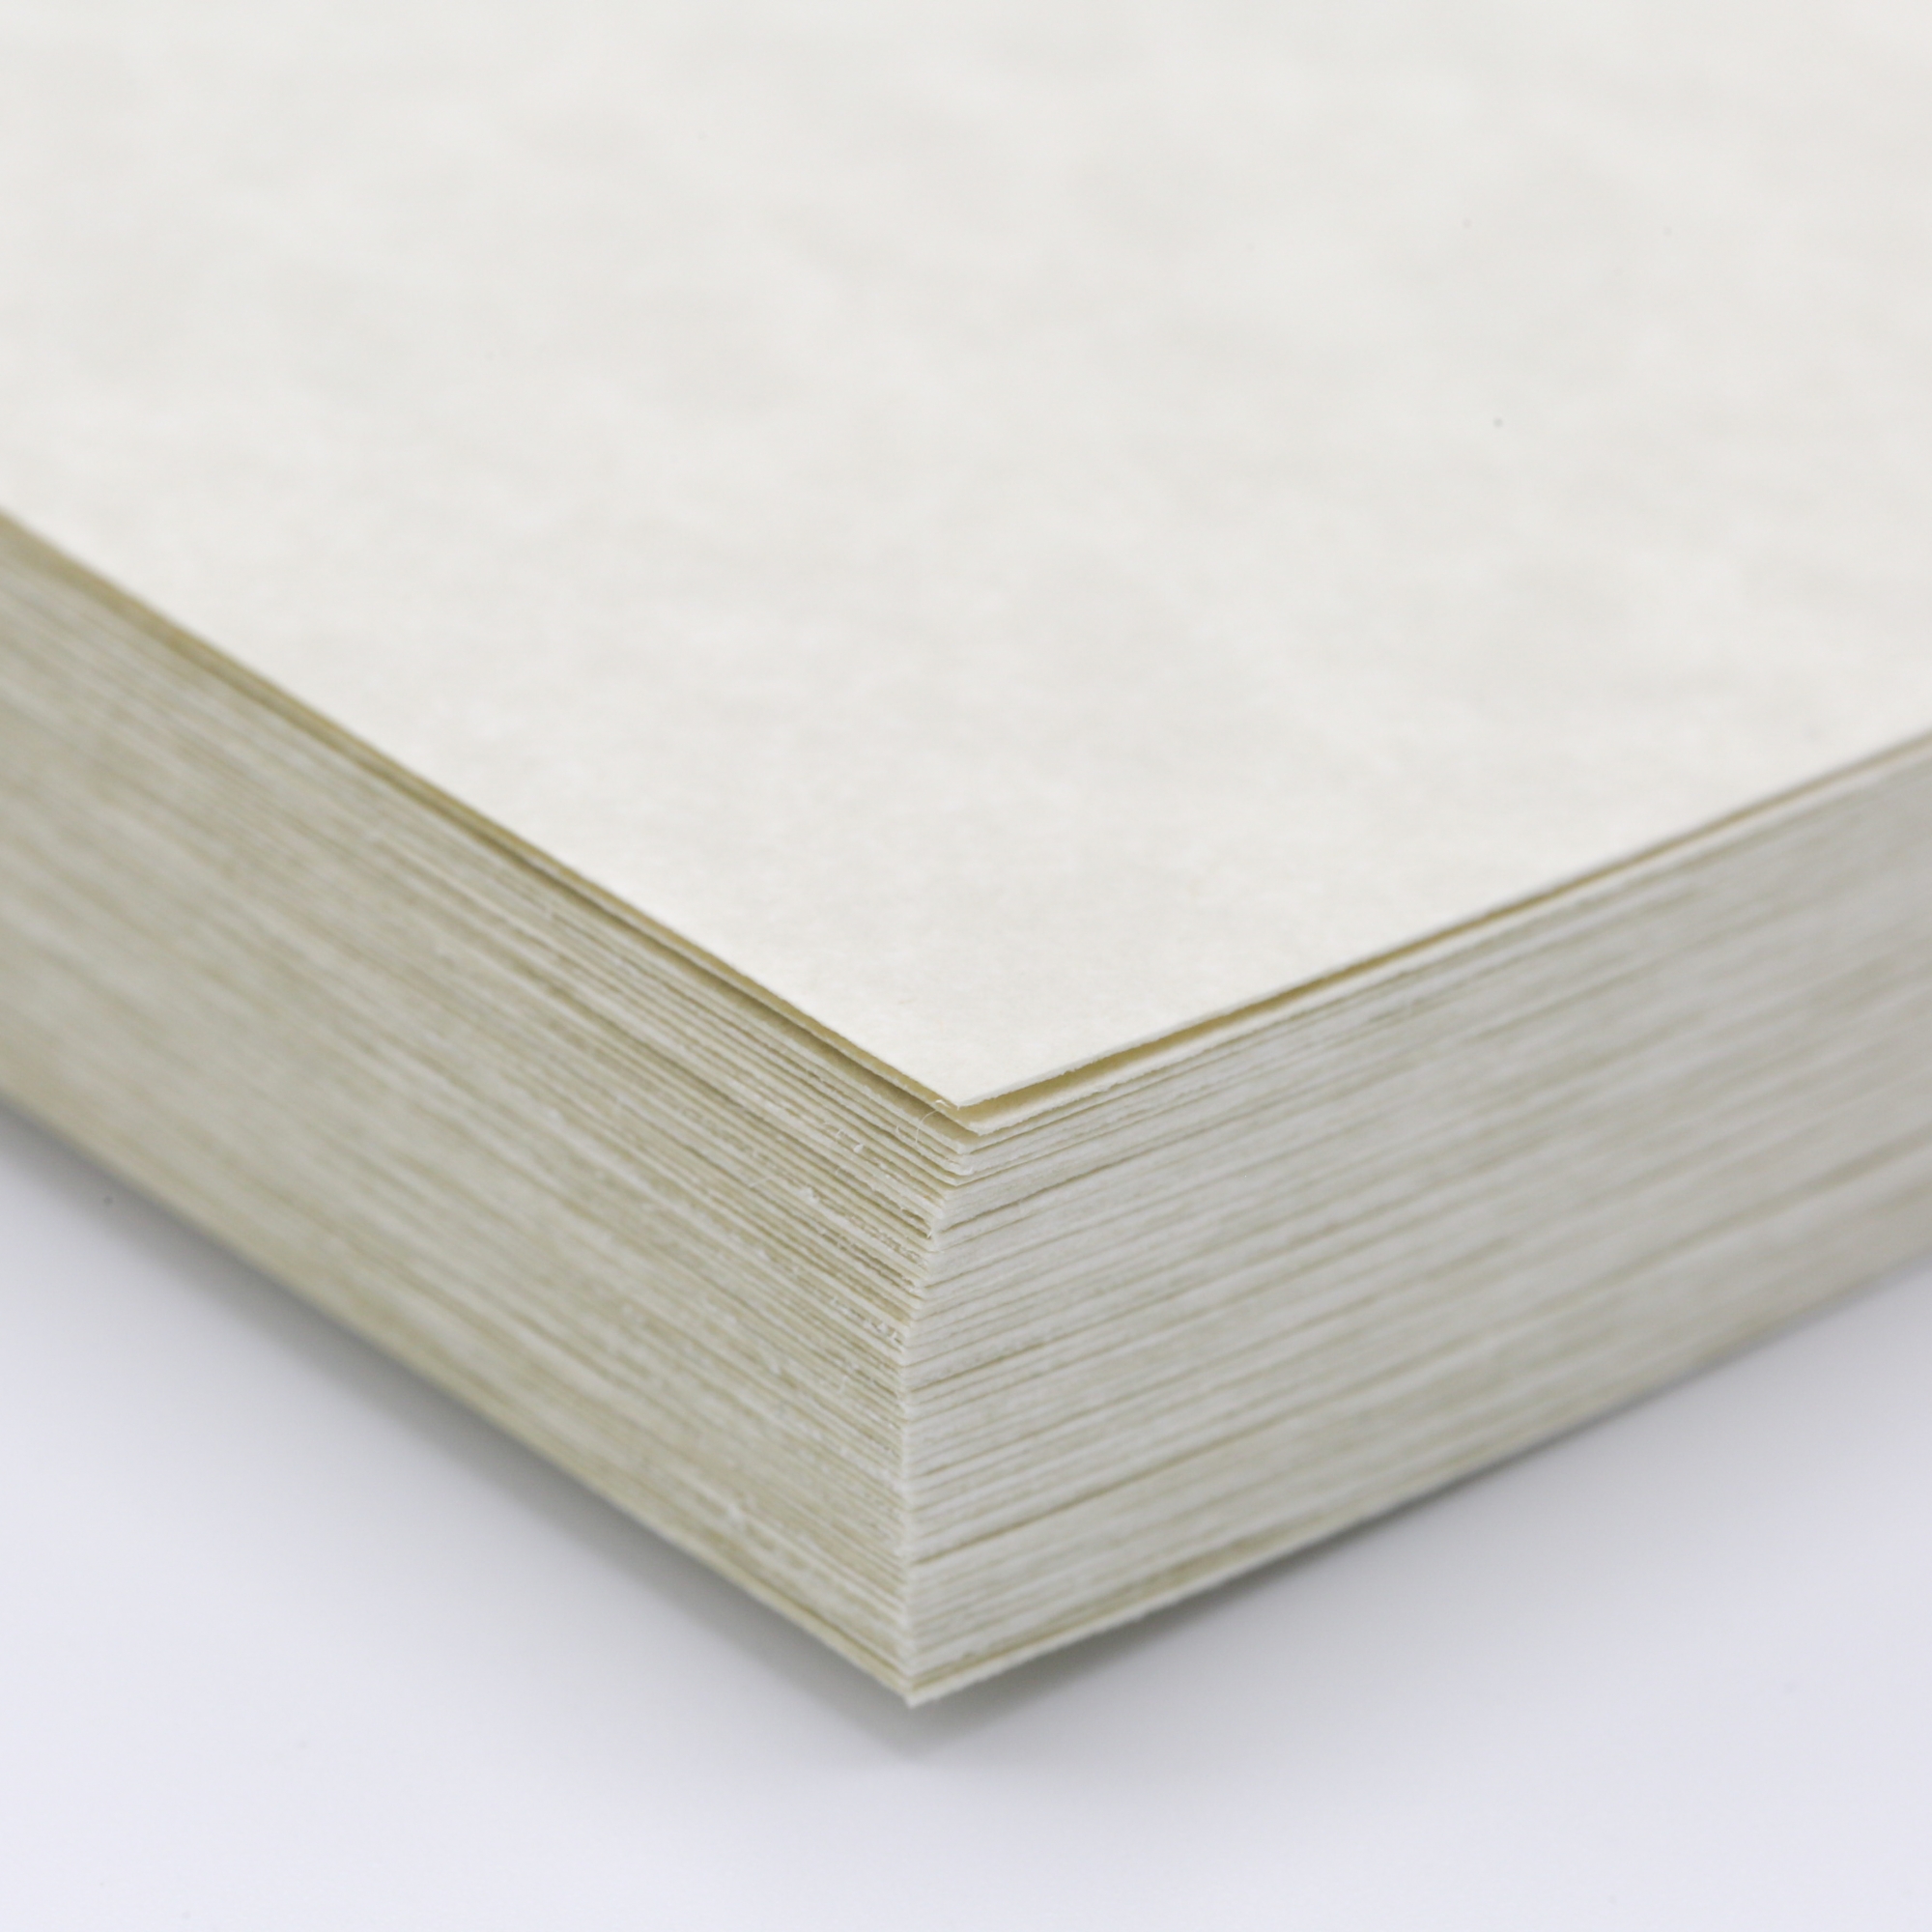 500 Sheets - Natural (Off-White/Cream) Legal Size Paper - 24lb Bond / 60lb  Text - 8 1/2 X 14 Inches - Great for Documents, Programs, Menus, and More!